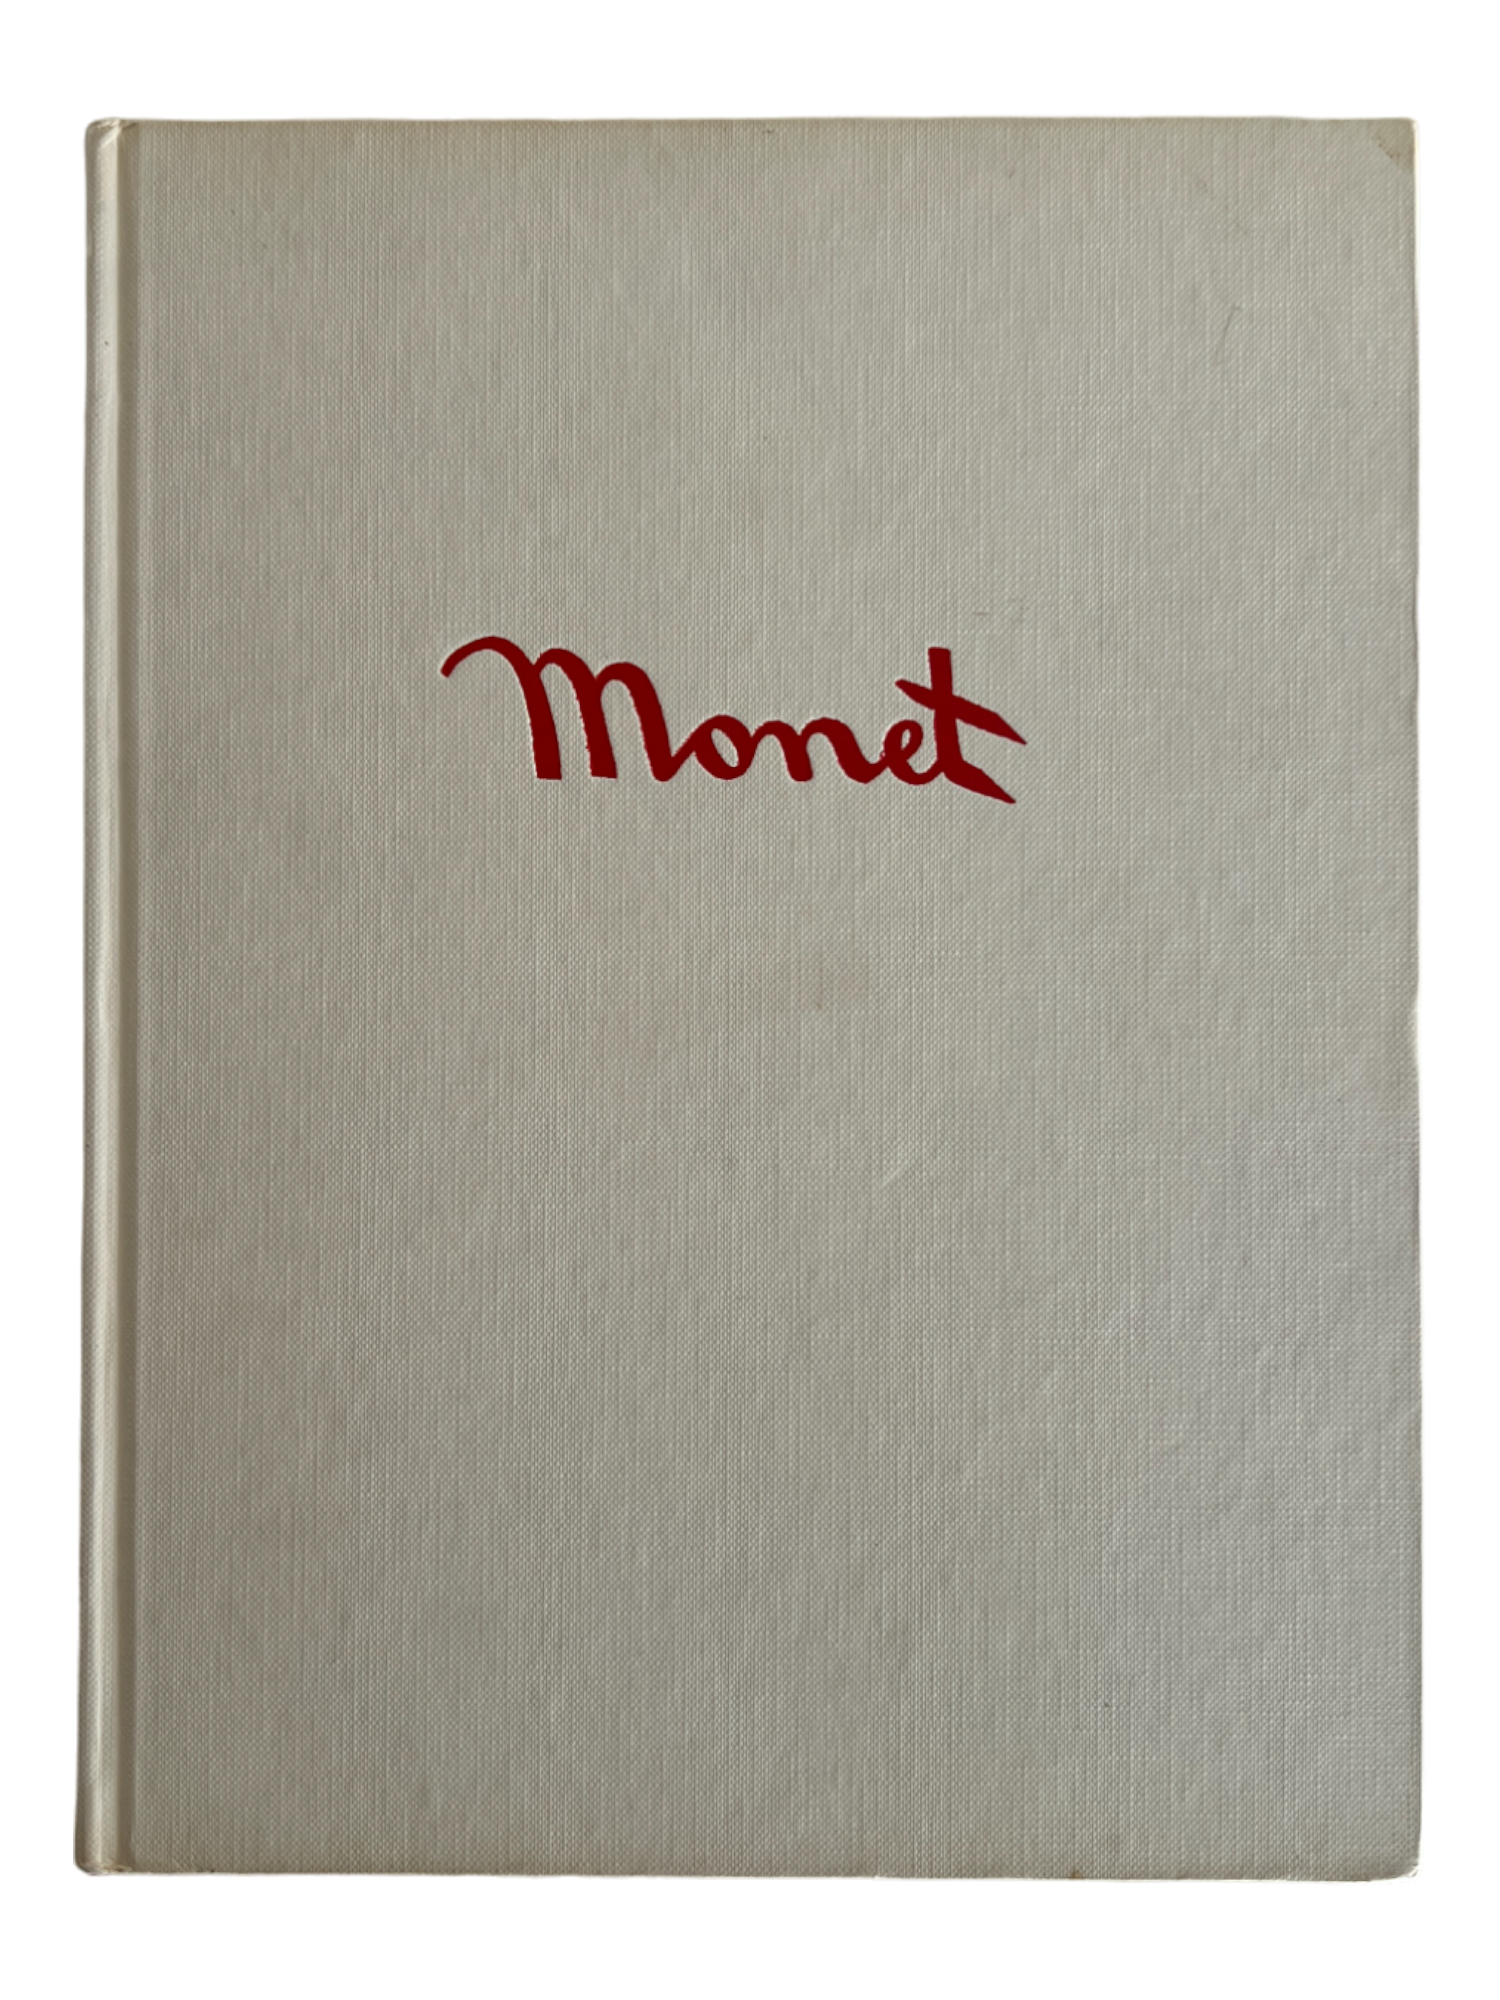 Monet, 1970s - Printed in Italy